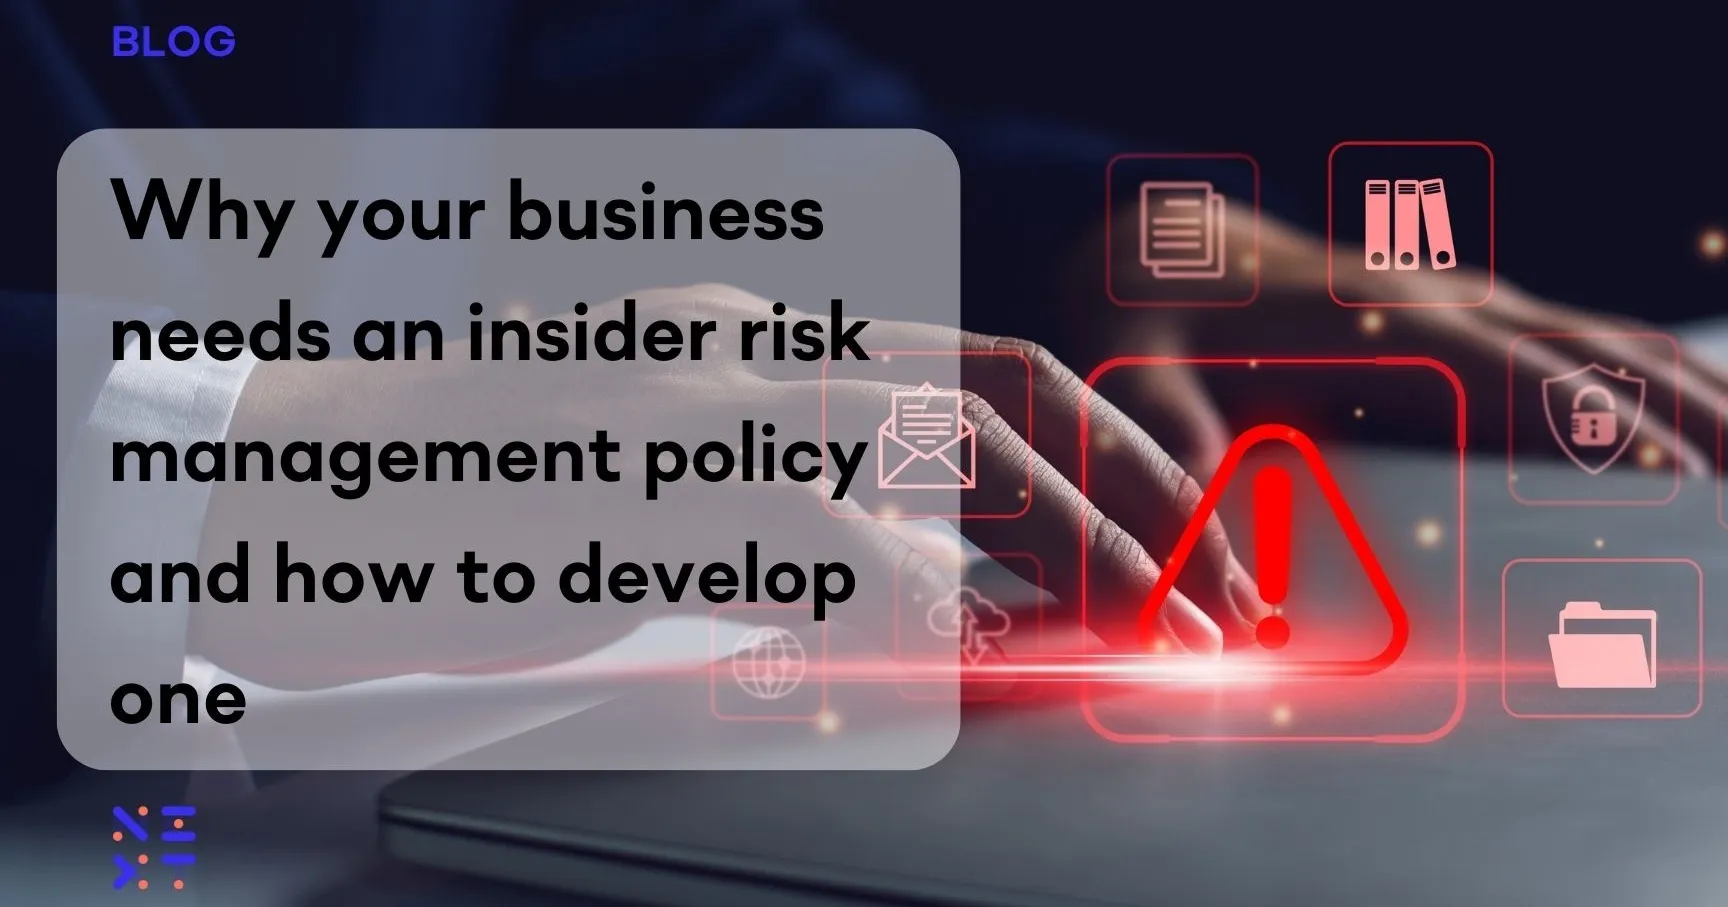 Why your business needs an insider risk management policy and how to develop one